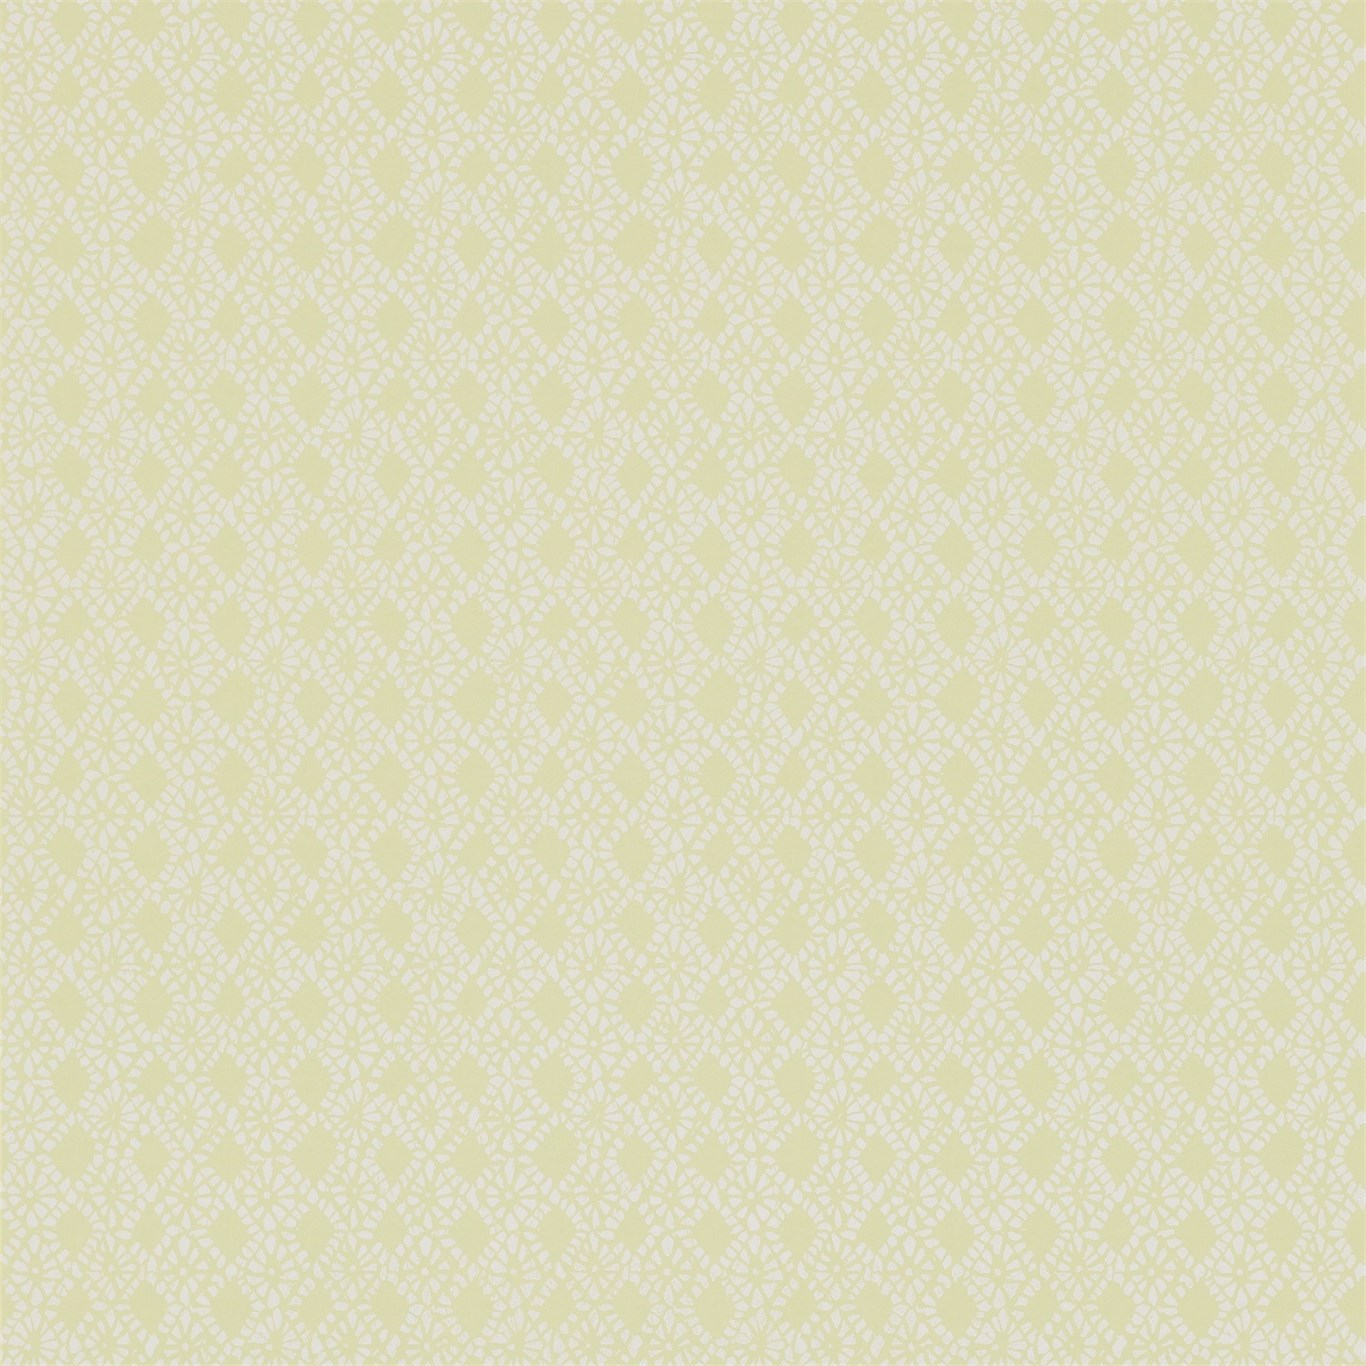 Ammi Chartreuse Wallpaper by HAR